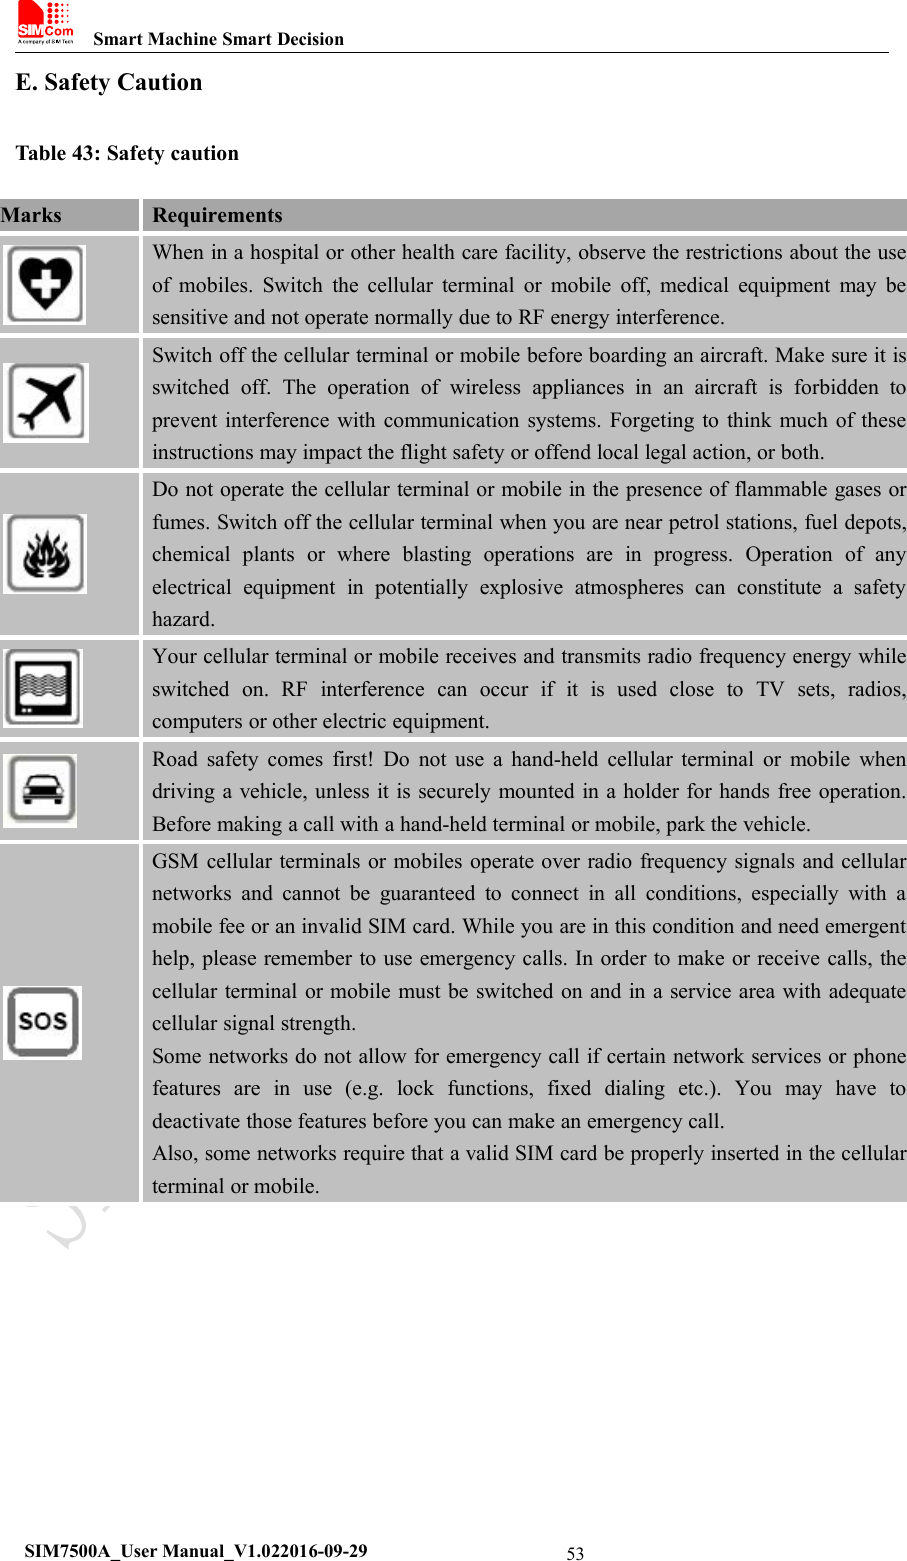 Smart Machine Smart DecisionSIM7500A_User Manual_V1.022016-09-2953E. Safety CautionTable 43: Safety cautionMarksRequirementsWhen in a hospital or other health care facility, observe the restrictions about the useof mobiles. Switch the cellular terminal or mobile off, medical equipment may besensitive and not operate normally due to RF energy interference.Switch off the cellular terminal or mobile before boarding an aircraft. Make sure it isswitched off. The operation of wireless appliances in an aircraft is forbidden toprevent interference with communication systems. Forgeting to think much of theseinstructions may impact the flight safety or offend local legal action, or both.Do not operate the cellular terminal or mobile in the presence of flammable gases orfumes. Switch off the cellular terminal when you are near petrol stations, fuel depots,chemical plants or where blasting operations are in progress. Operation of anyelectrical equipment in potentially explosive atmospheres can constitute a safetyhazard.Your cellular terminal or mobile receives and transmits radio frequency energy whileswitched on. RF interference can occur if it is used close to TV sets, radios,computers or other electric equipment.Road safety comes first! Do not use a hand-held cellular terminal or mobile whendriving a vehicle, unless it is securely mounted in a holder for hands free operation.Before making a call with a hand-held terminal or mobile, park the vehicle.GSM cellular terminals or mobiles operate over radio frequency signals and cellularnetworks and cannot be guaranteed to connect in all conditions, especially with amobile fee or an invalid SIM card. While you are in this condition and need emergenthelp, please remember to use emergency calls. In order to make or receive calls, thecellular terminal or mobile must be switched on and in a service area with adequatecellular signal strength.Some networks do not allow for emergency call if certain network services or phonefeatures are in use (e.g. lock functions, fixed dialing etc.). You may have todeactivate those features before you can make an emergency call.Also, some networks require that a valid SIM card be properly inserted in the cellularterminal or mobile.